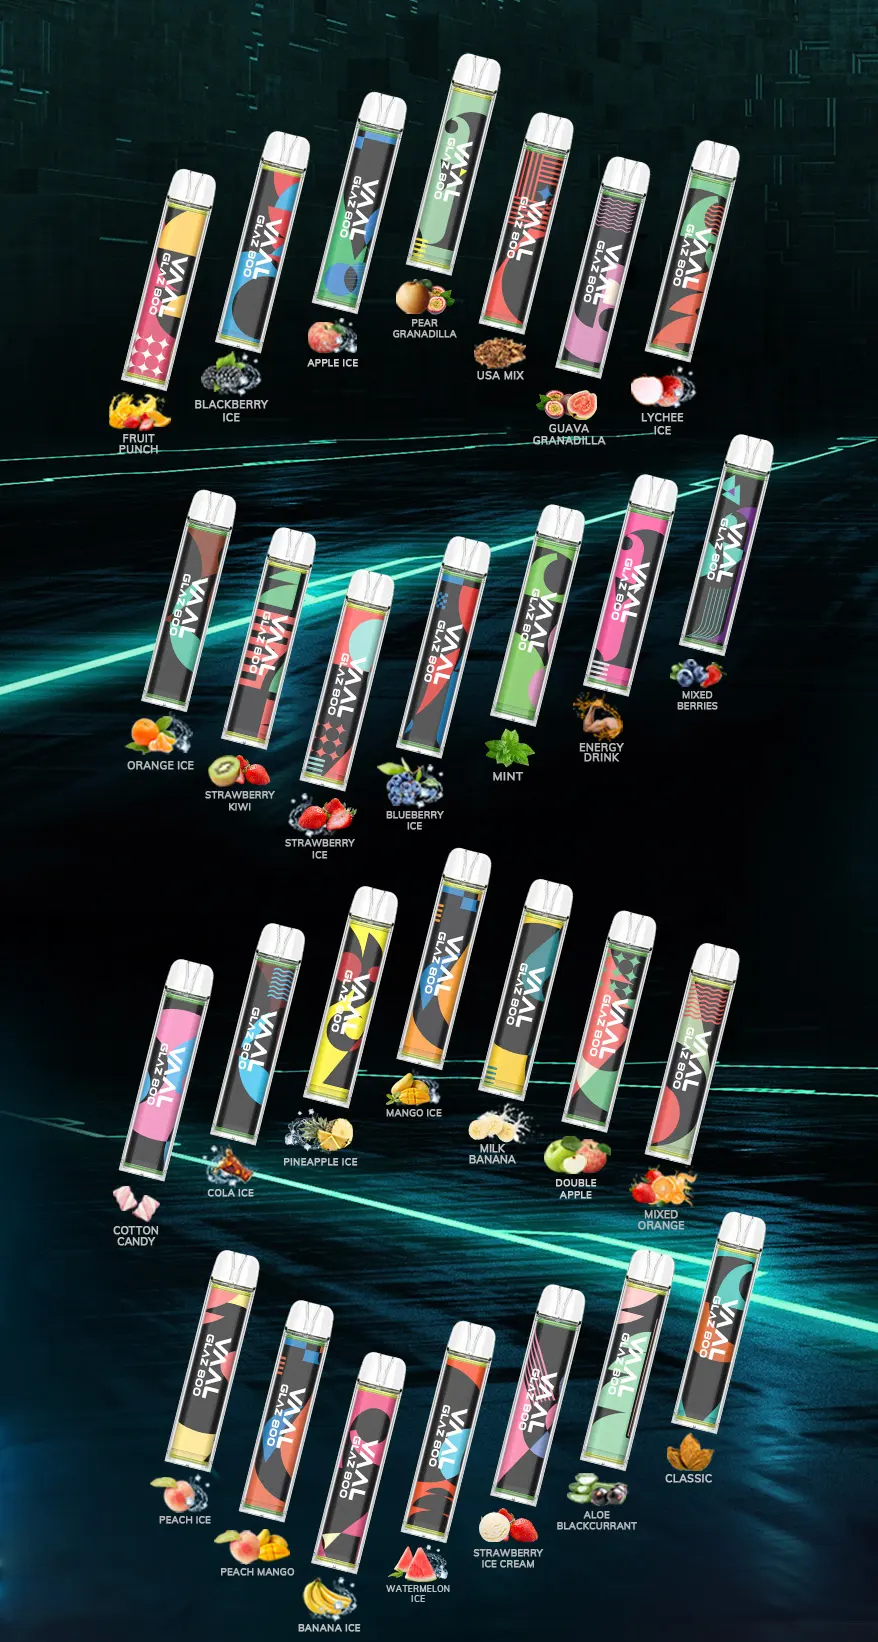 There are a variety of flavors for VAAL Glaz800 disposable vape to choose from, including Fruit Punch, Blackberry Ice, Apple Ice, Pear Granadilla, USA Mix, Guava Granadilla, Lychee Ice, Orange Ice, Strawberry Kiwi, Strawberry Ice, Blueberry Ice, Mint, Energy Drink, Mixed Berries, Cotton Candy, Cola Ice, Pineapple Ice, Mango Ice, Milk Banana, Double Apple, Mixed Orange, Peach Ice, Peach Mango, Banana Ice, Watermelon Ice, Strawberry Ice Cream, Aloe Blackcurrant and Classic.